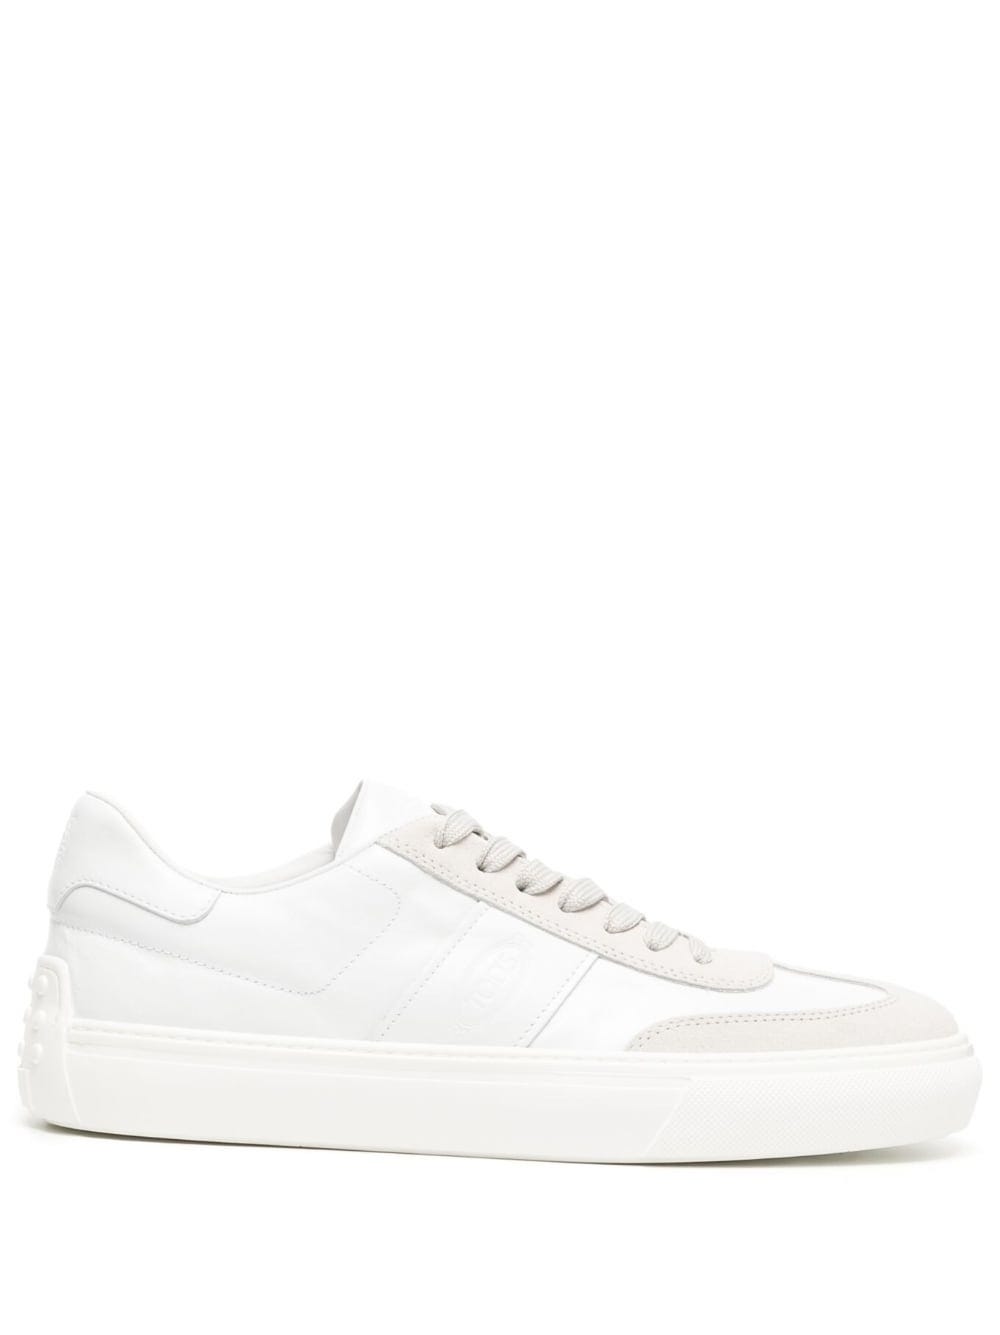 TOD'S WHITE LEATHER LOW TOP SNEAKERS